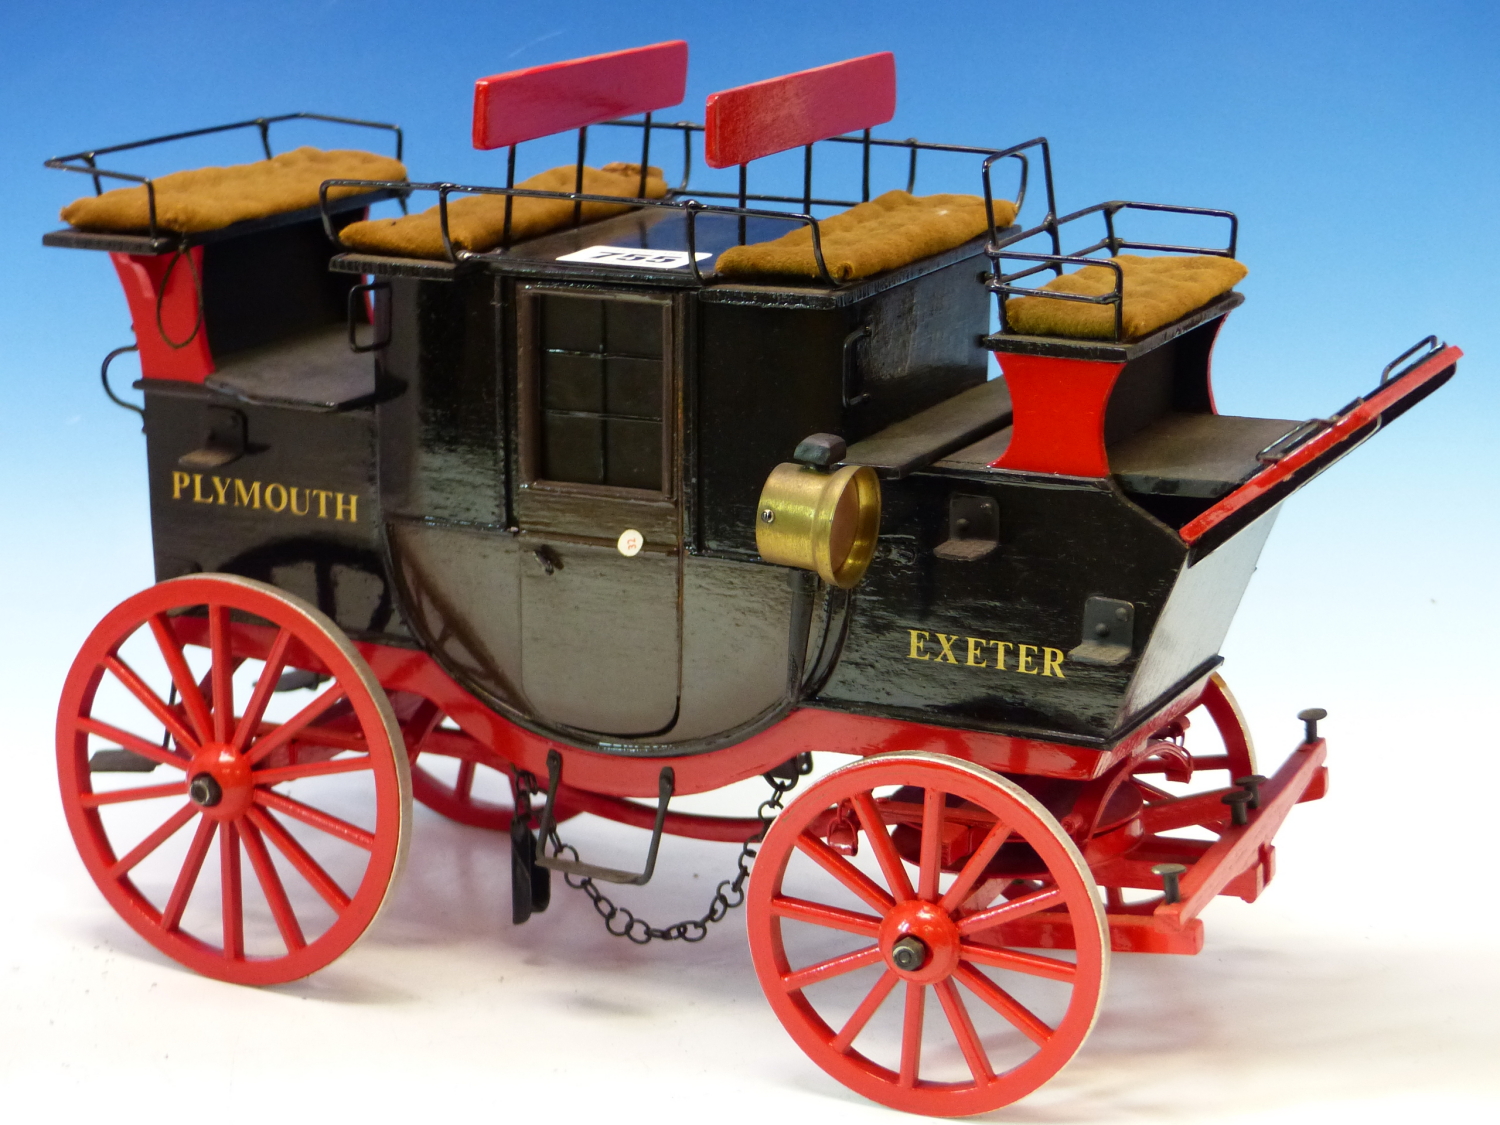 A SCALE MODEL OF A SIGN WRITTEN PLYMOUTH, EXETER CARRIAGE. APPROX LENGTH 35cms. - Image 2 of 3